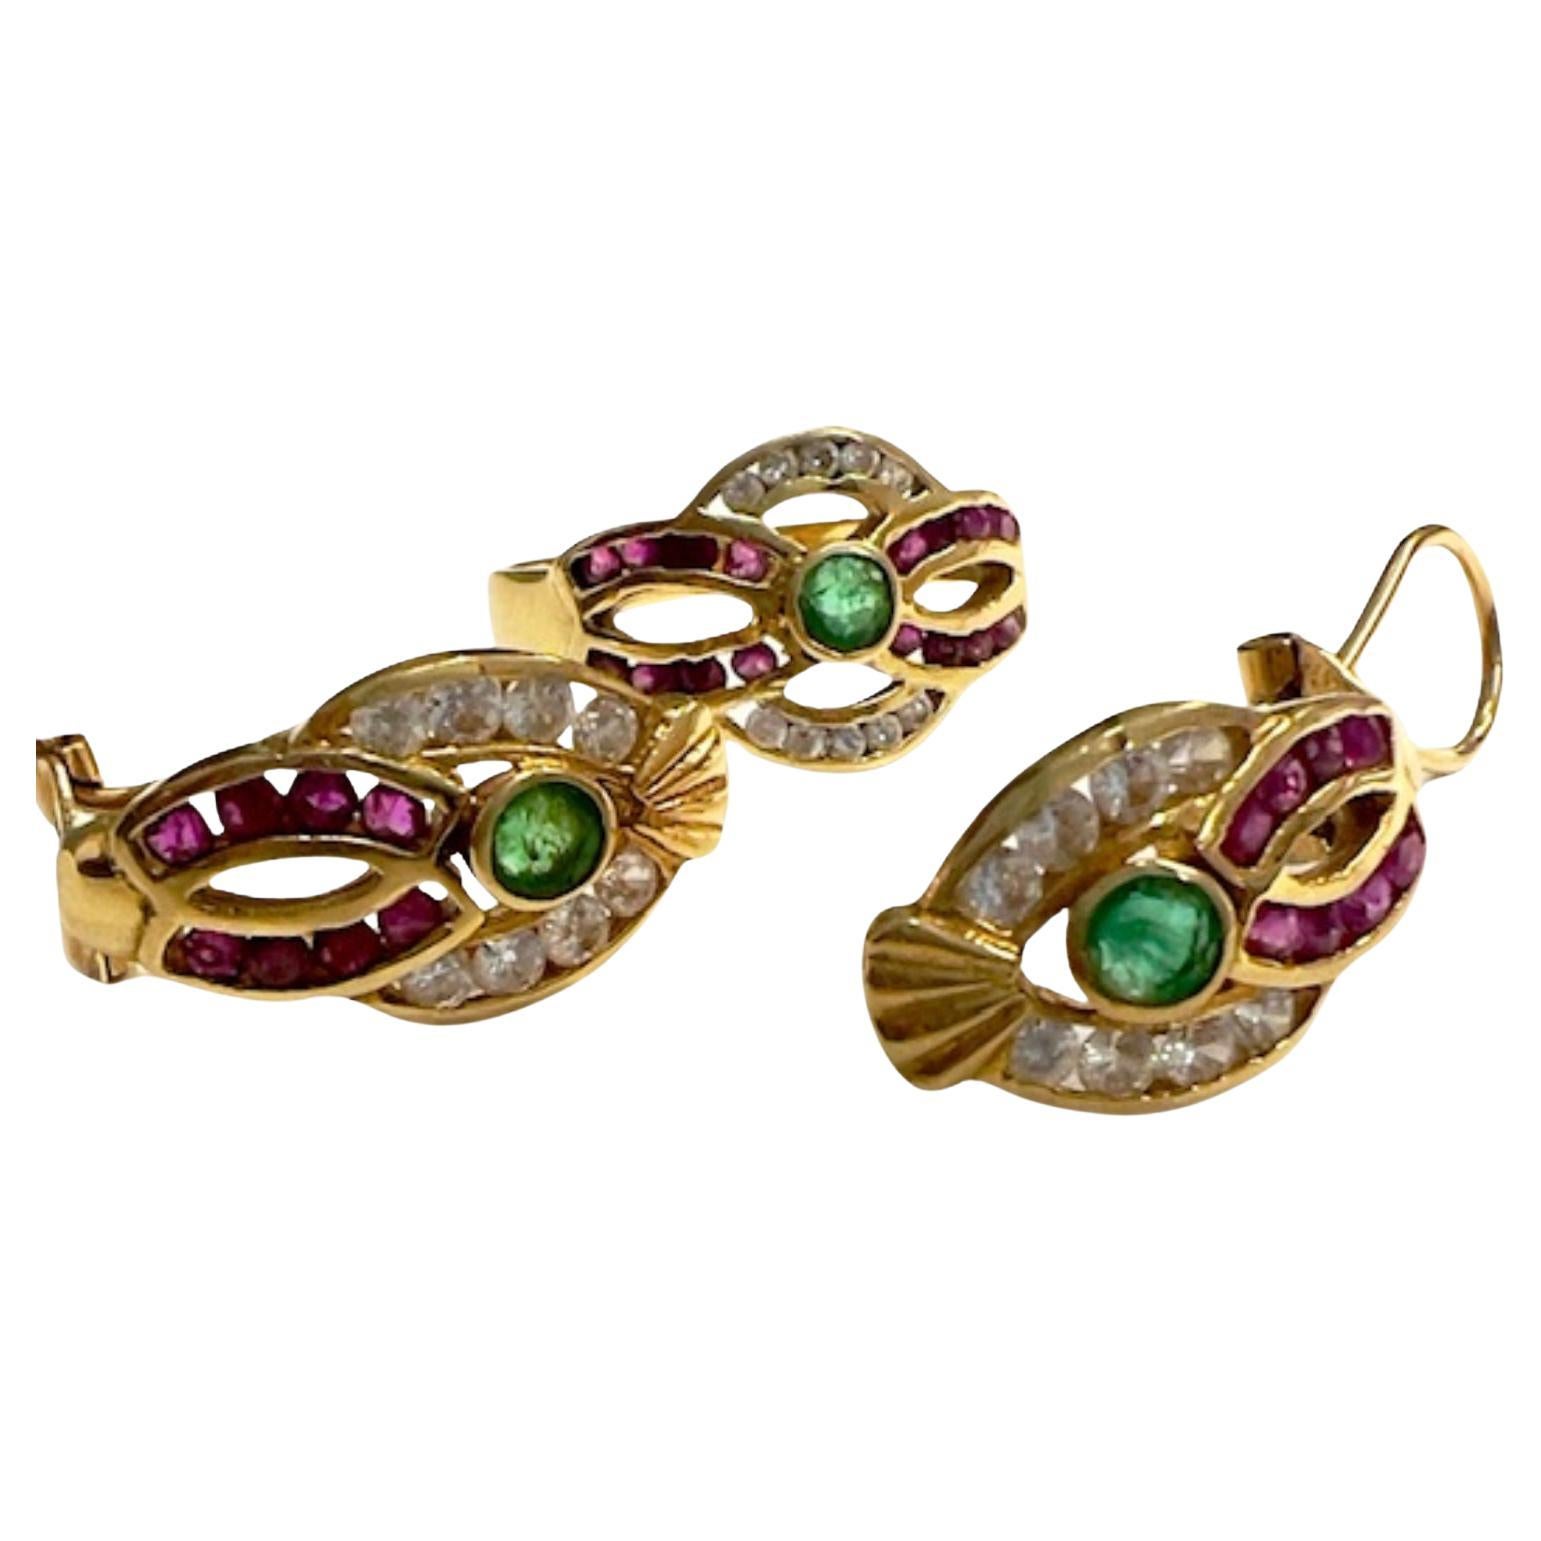 Contemporary Zircon, Emeralds, a Rubies 18 kts yellow Gold Earrings and Ring 